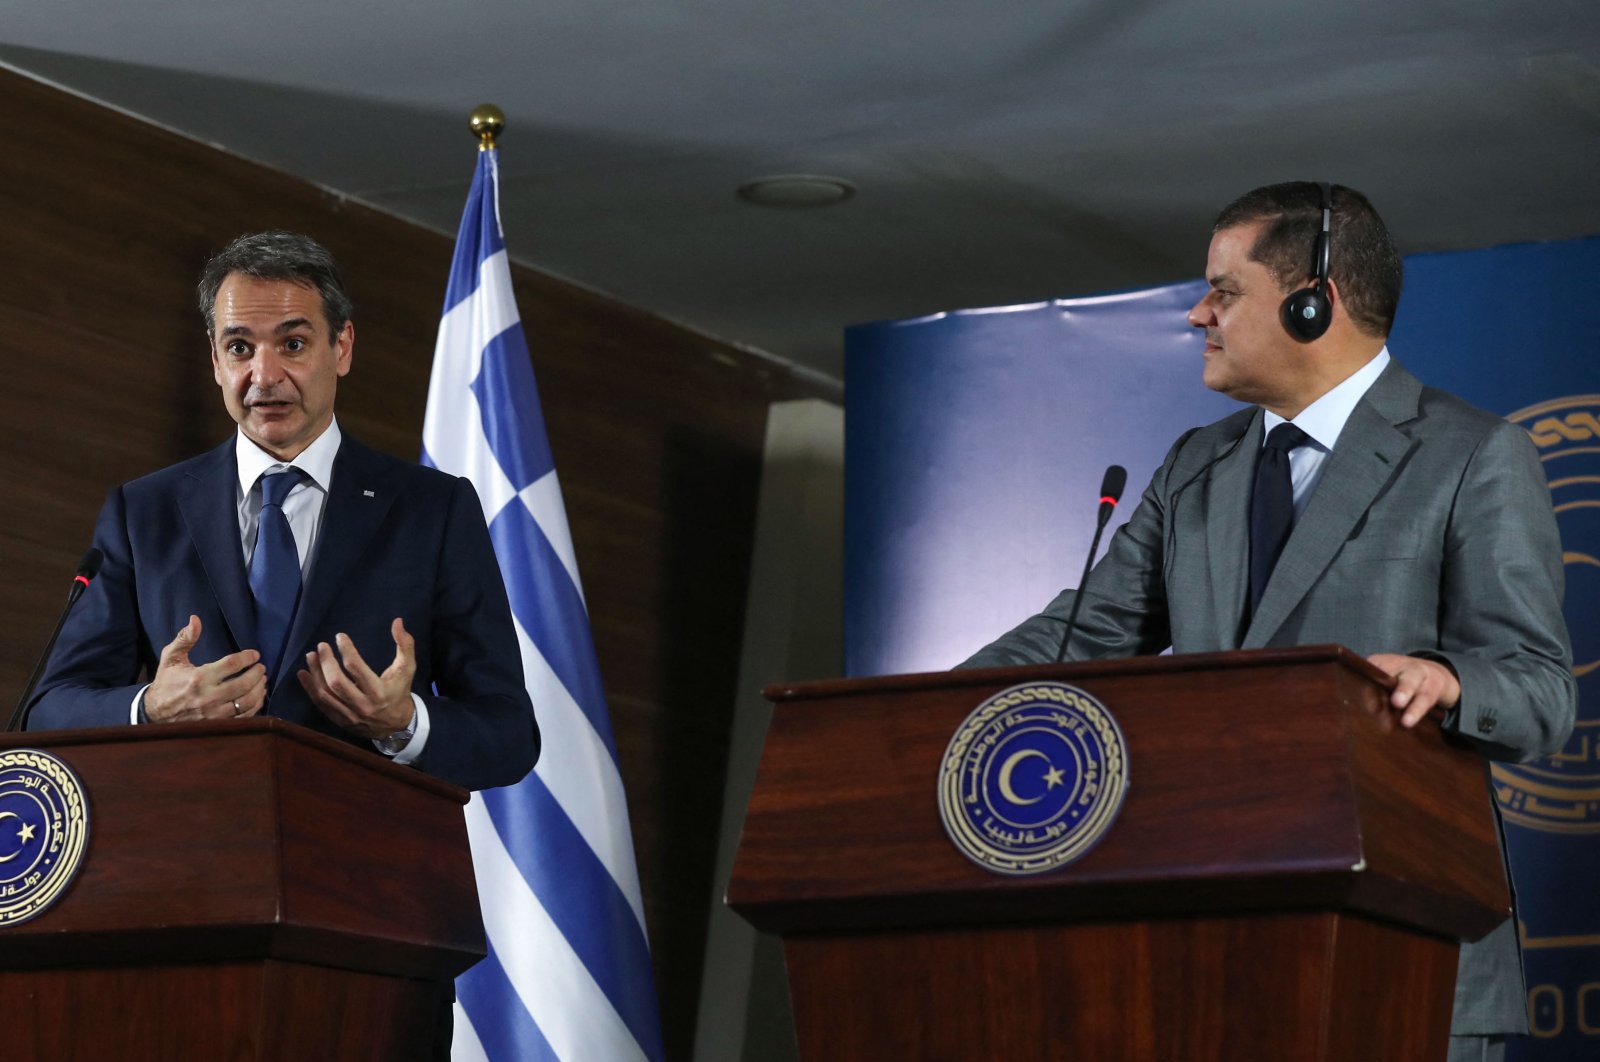 Greece's Prime Minister Kyriakos Mitsotakis (L) and Libya's interim Prime Minister Abdul Hamid Dbeibah (R) hold a joint press conference in the capital Tripoli, Libya, April 6, 2021. (AFP Photo)